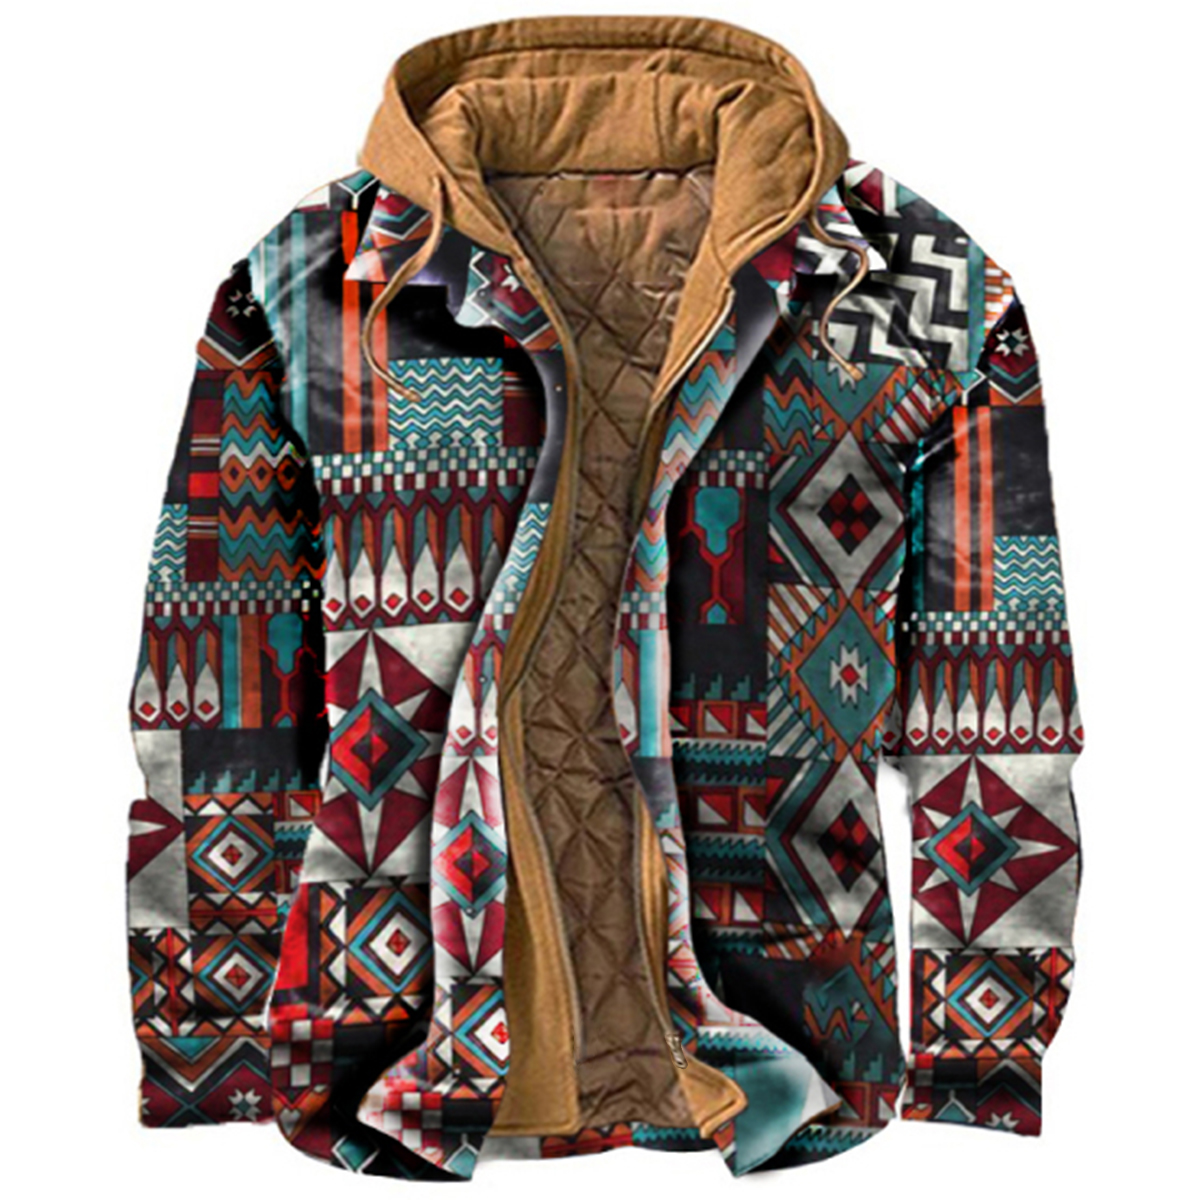 Men's Vintage Ethnic Print Chic Thermal Hooded Casual Jacket